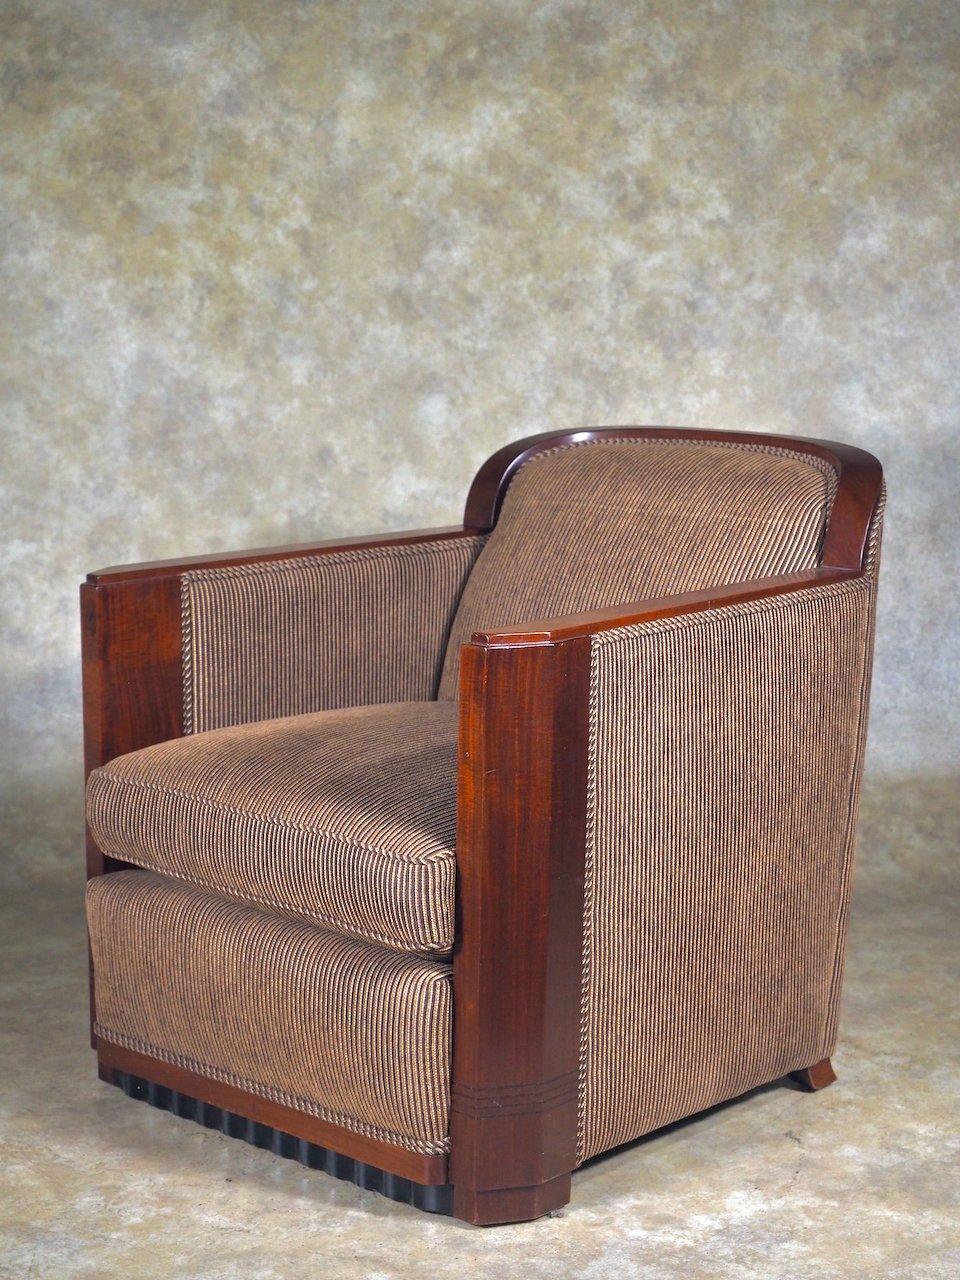 French Modernist Art Deco pair of sculpted wood frame club chairs by Dominique, circa 1930, in French walnut with ebonized inlays. Measures: 28” wide x 32” deep x 29” high.

Dominique


From a 1929 French exhibition catalog 